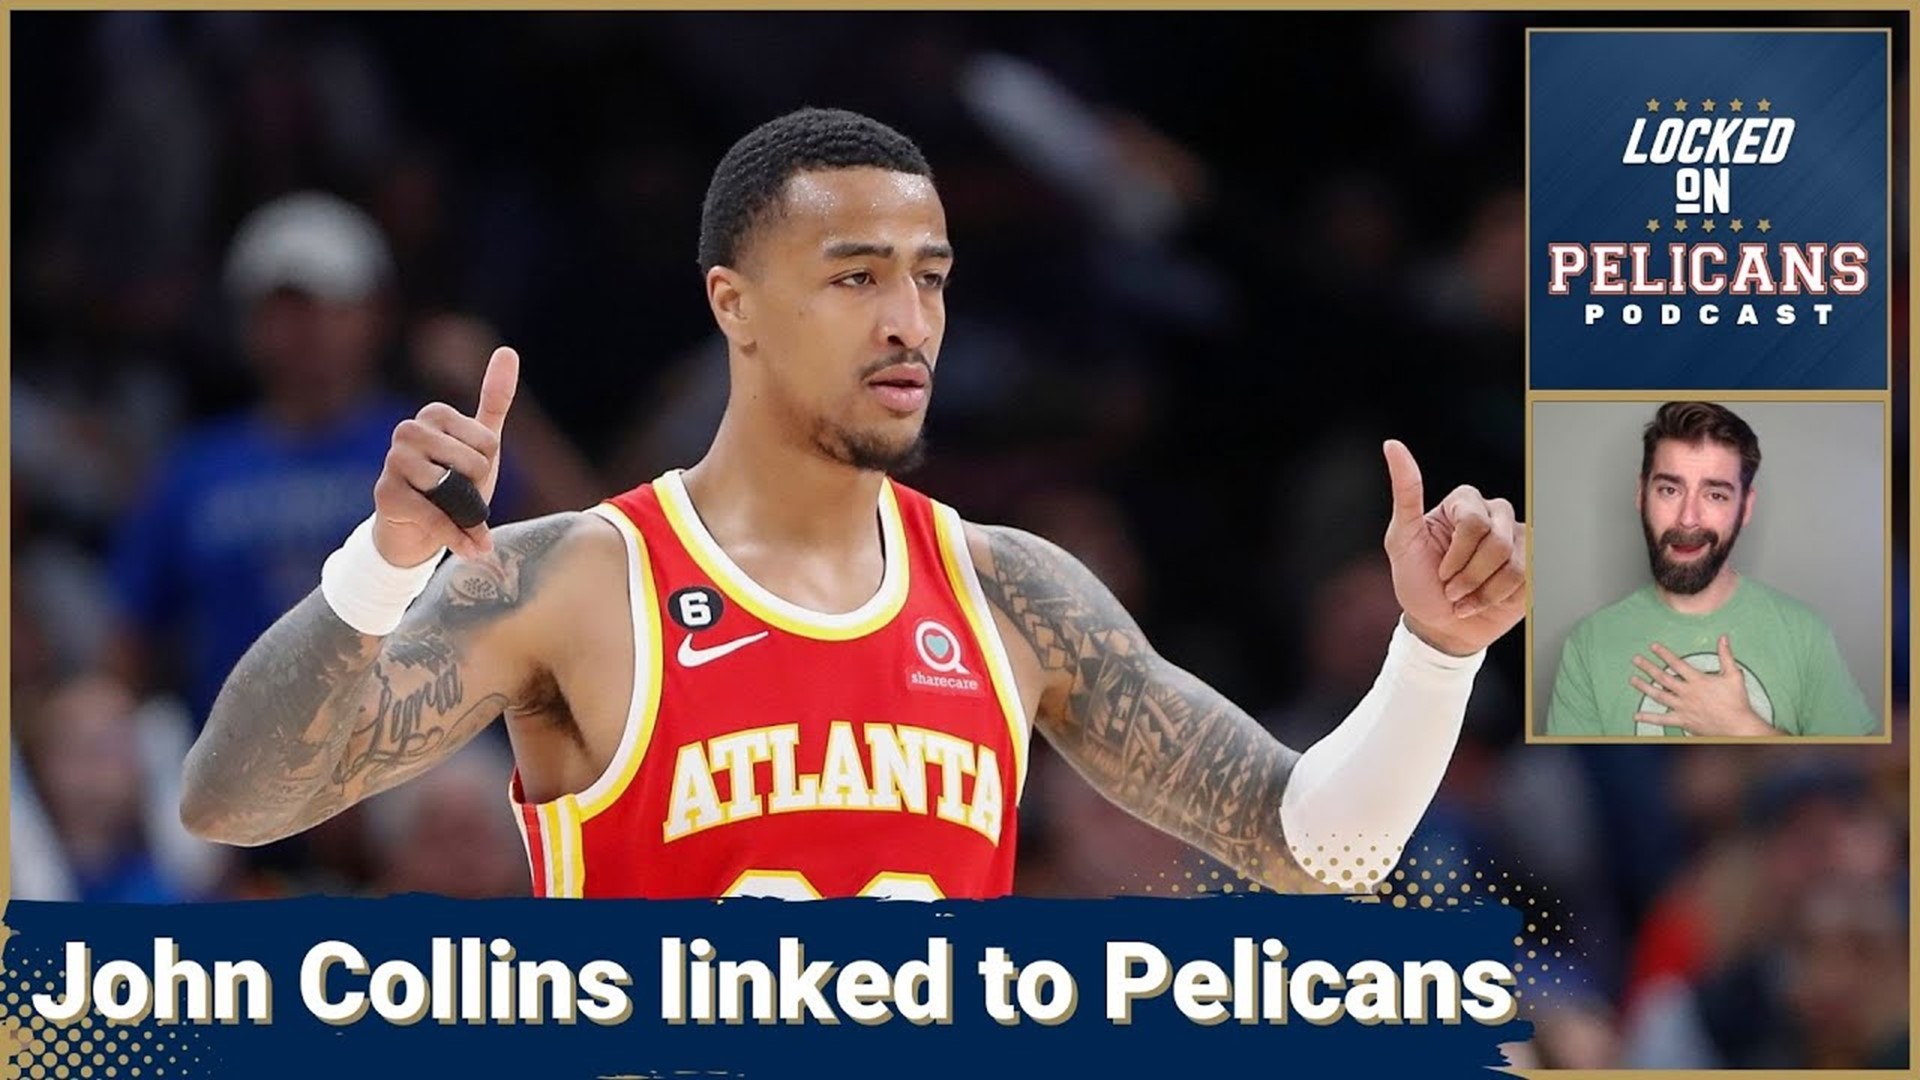 John Collins is the latest name linked to the New Orleans Pelicans in trade rumors.